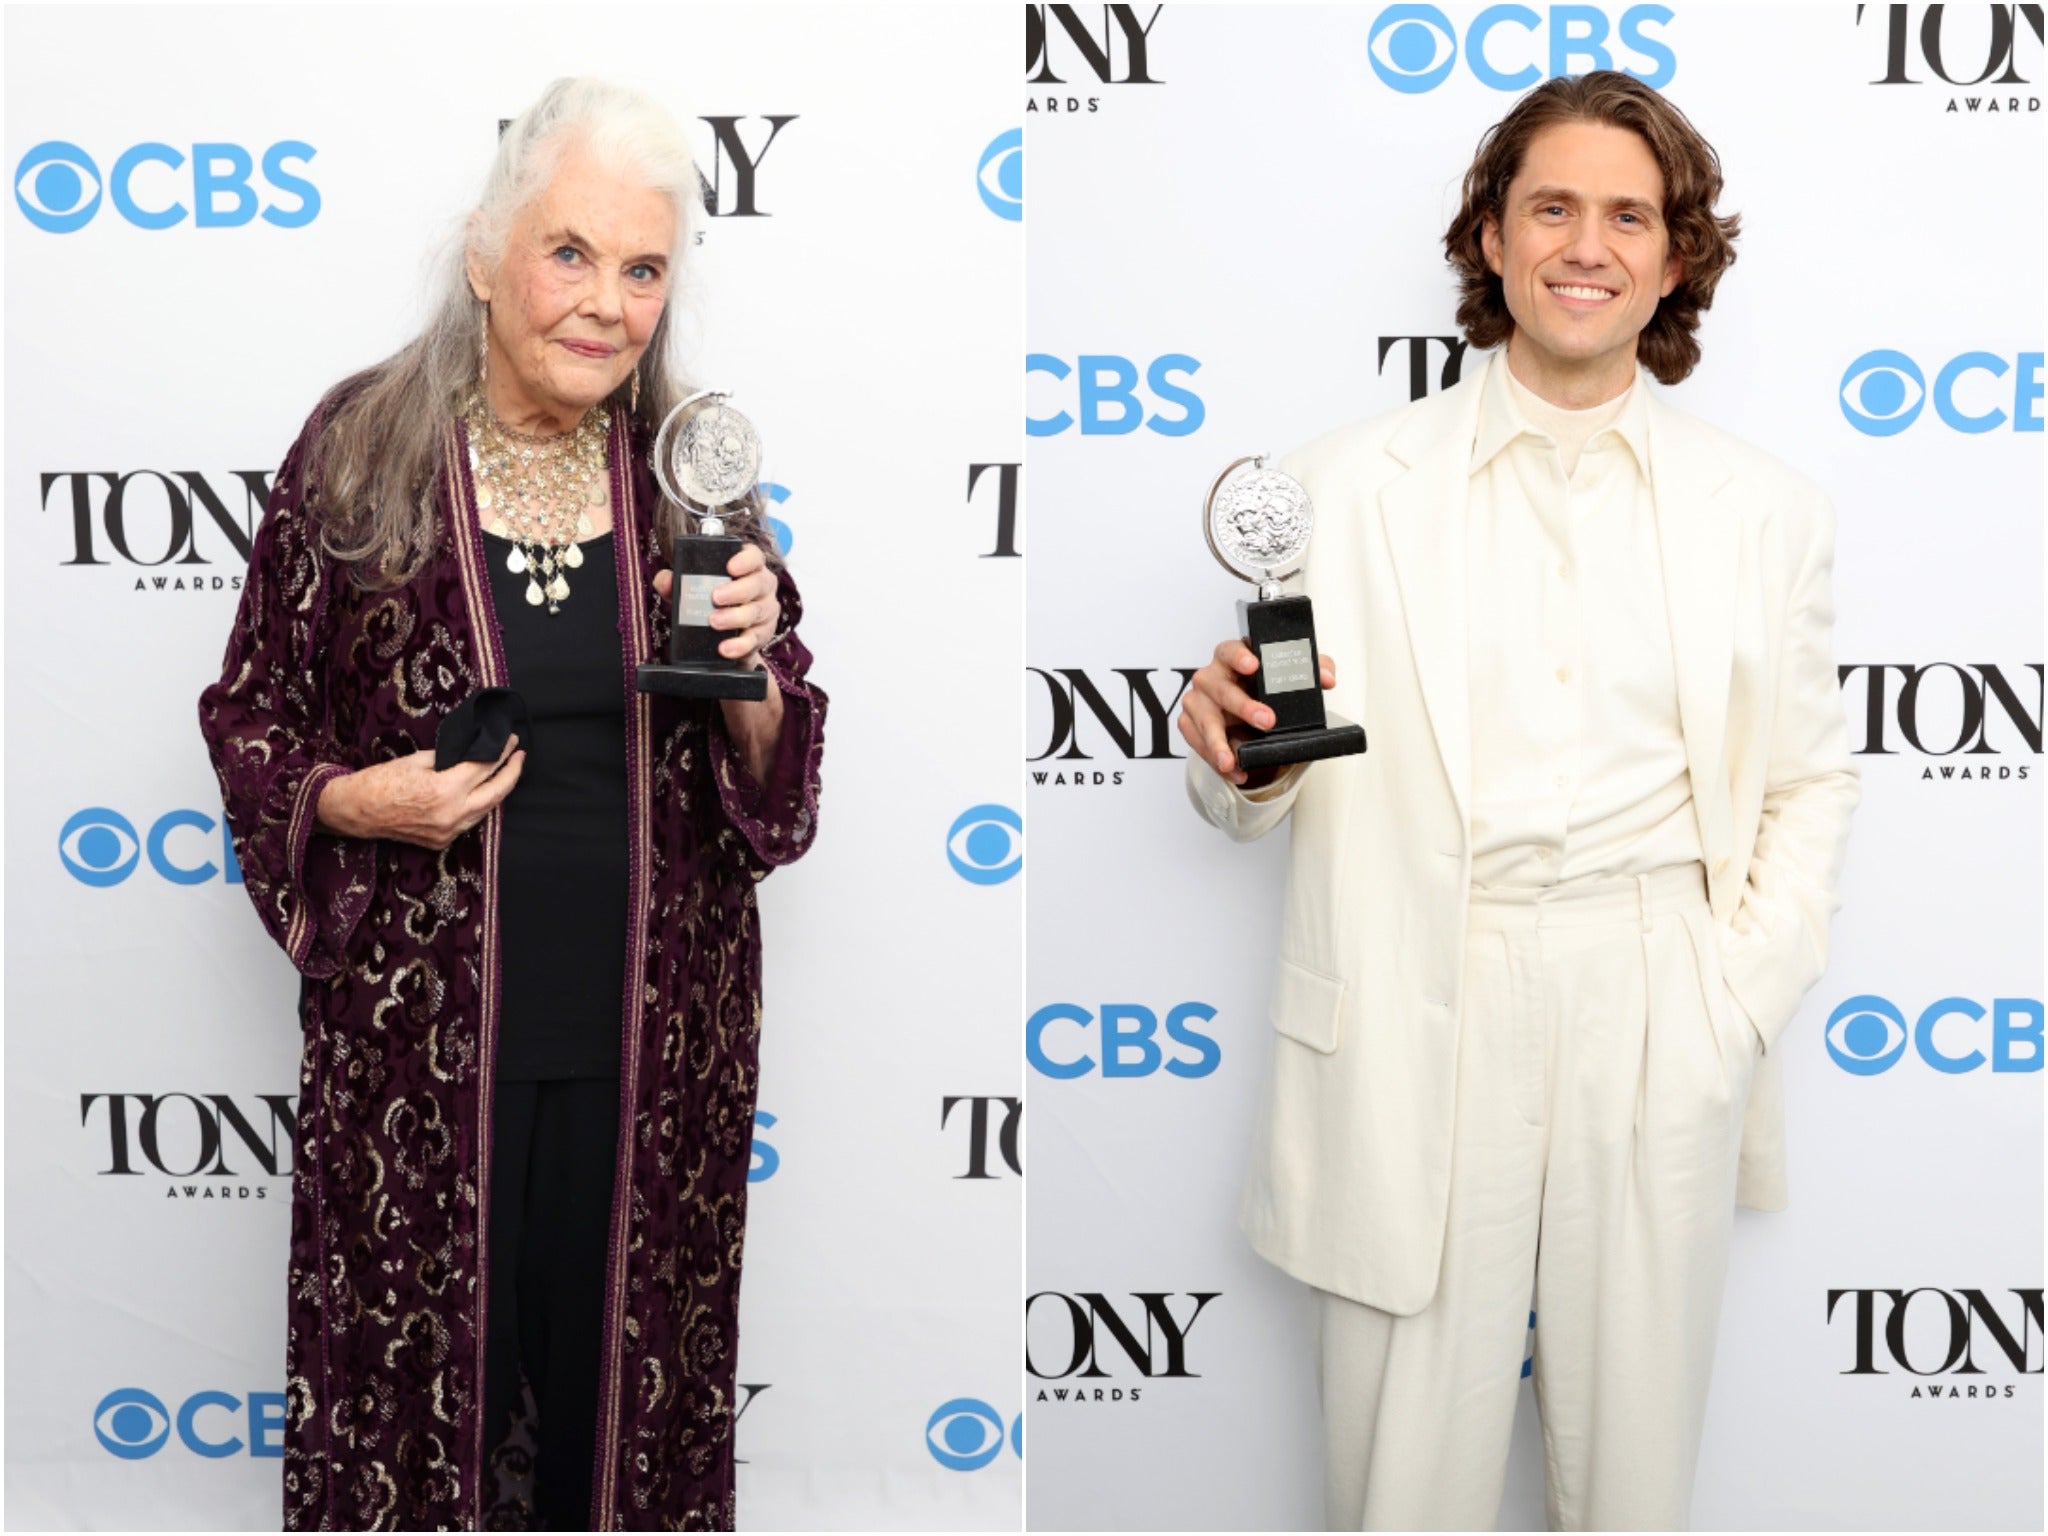 Lois Smith and Aaron Tveit with their awards at the 74th Tony Awards